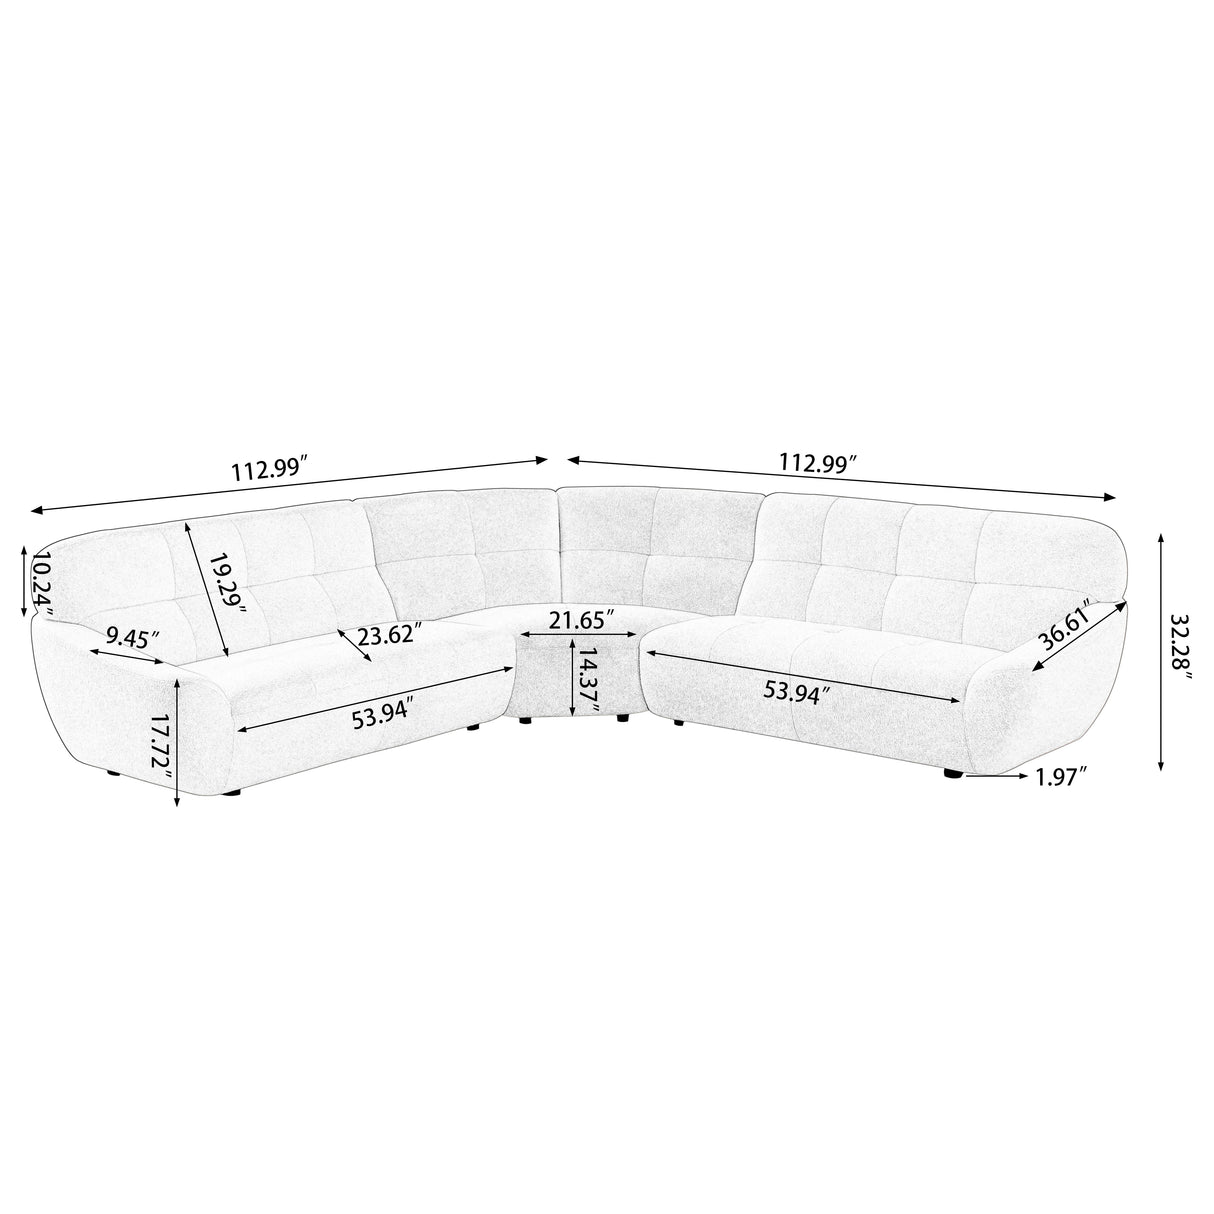 Youdao L-Shaped Sectional Sofa Oversied Corner Cloud Couch for Living Room Office Beige